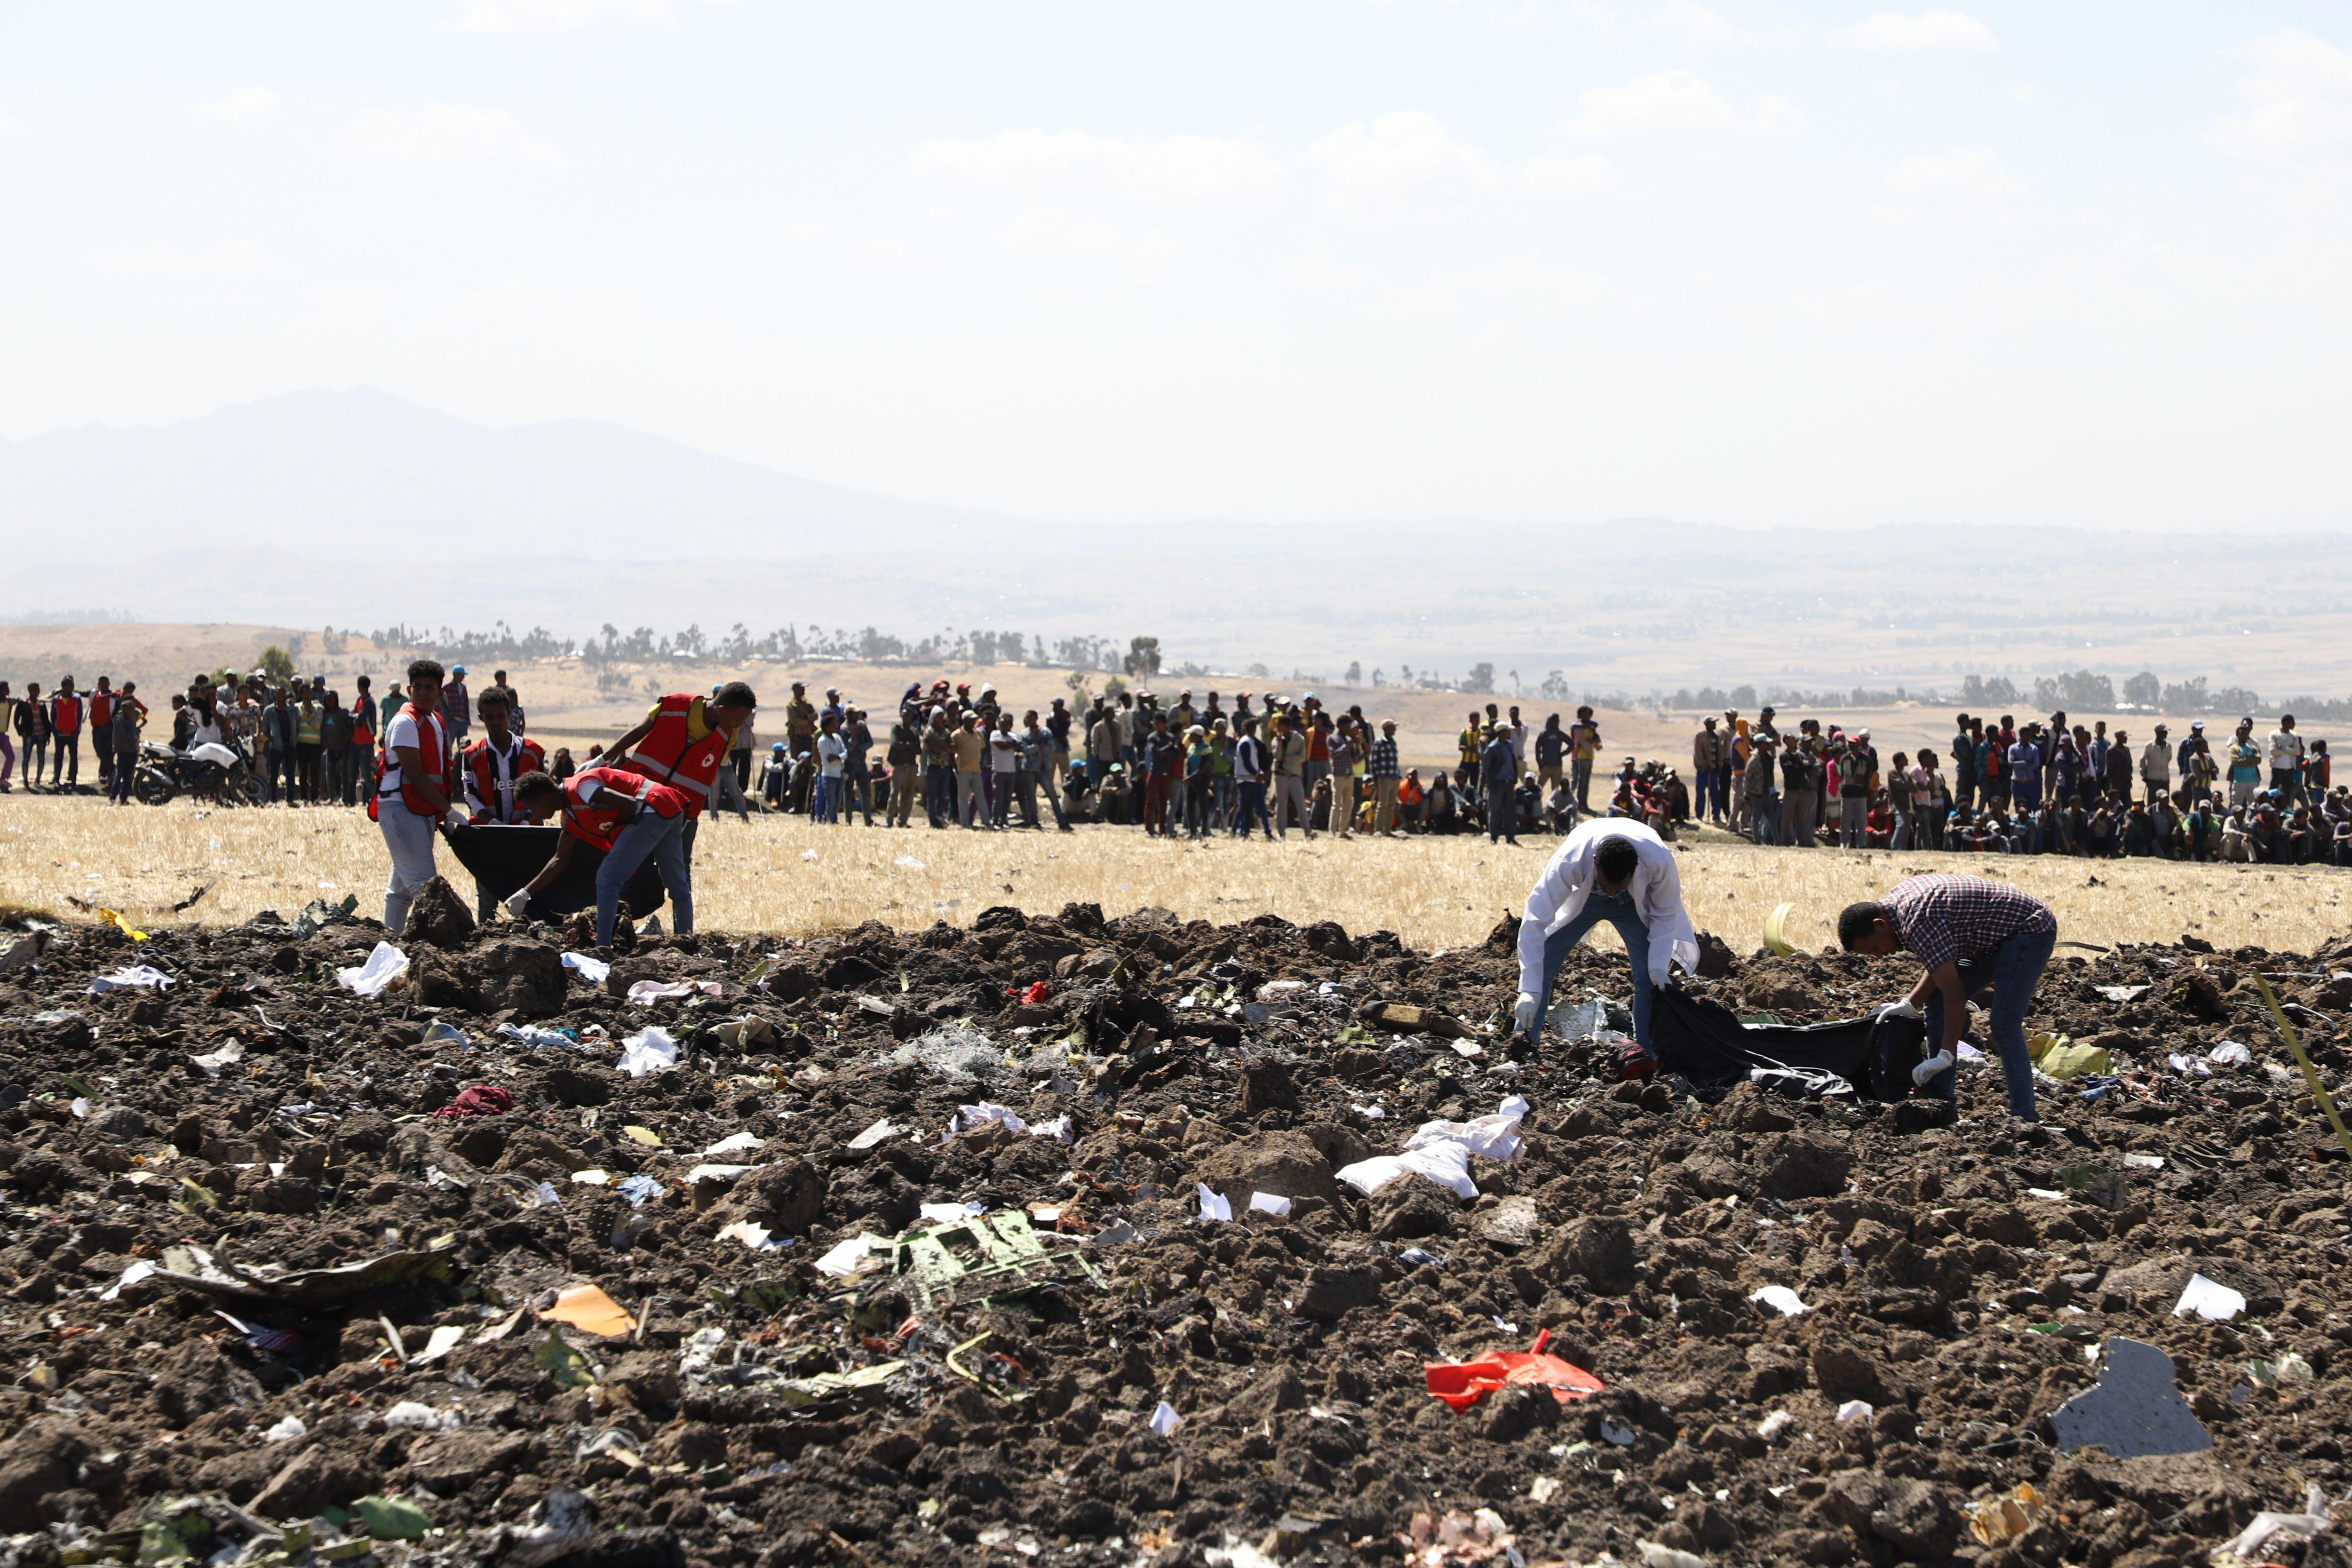 Rescue team collect remains of bodies amid debris at the crash site of Ethiopia Airlines near Bishoftu, a town southeast of Addis Ababa, Ethiopia, on March 10, 2019. 